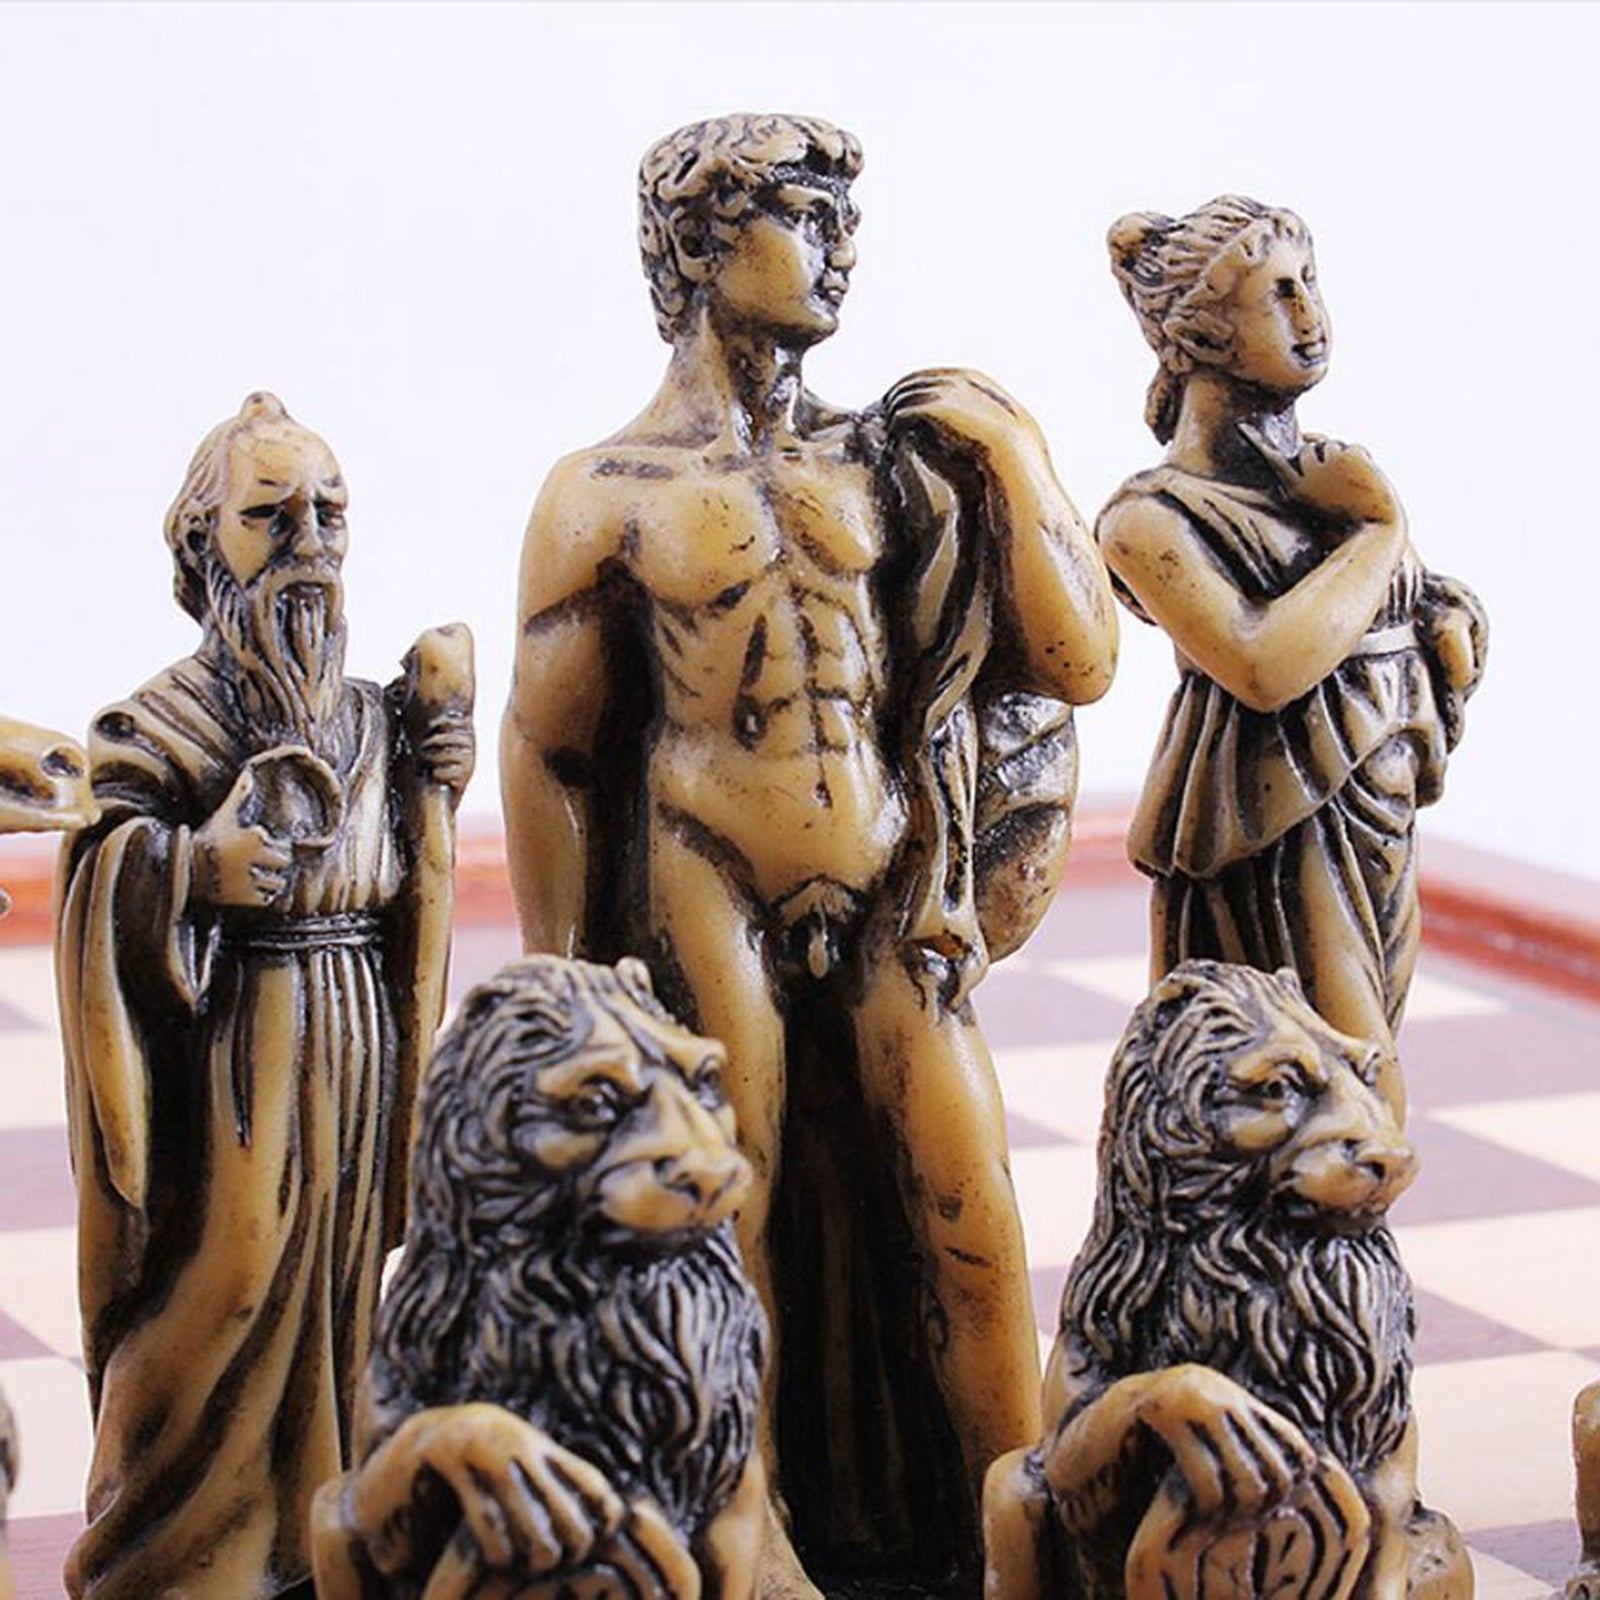 Resin Chess Set Roman Chess Pieces Games Travel for Kids and Adults